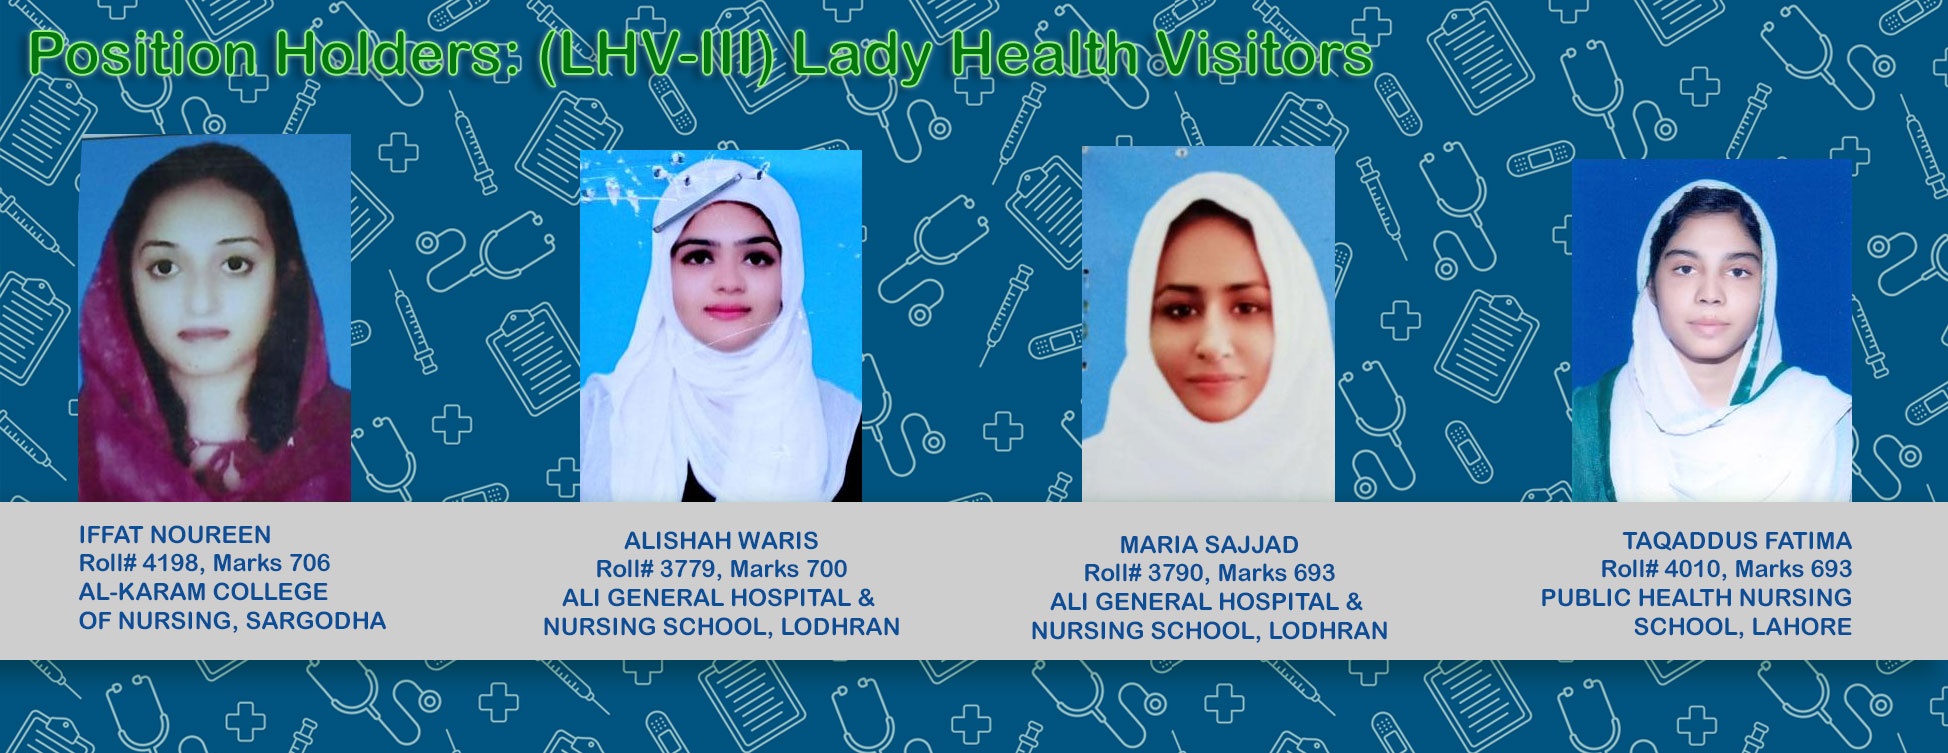 Position Holders -(LHV-III) Leady Health Visitor Names List